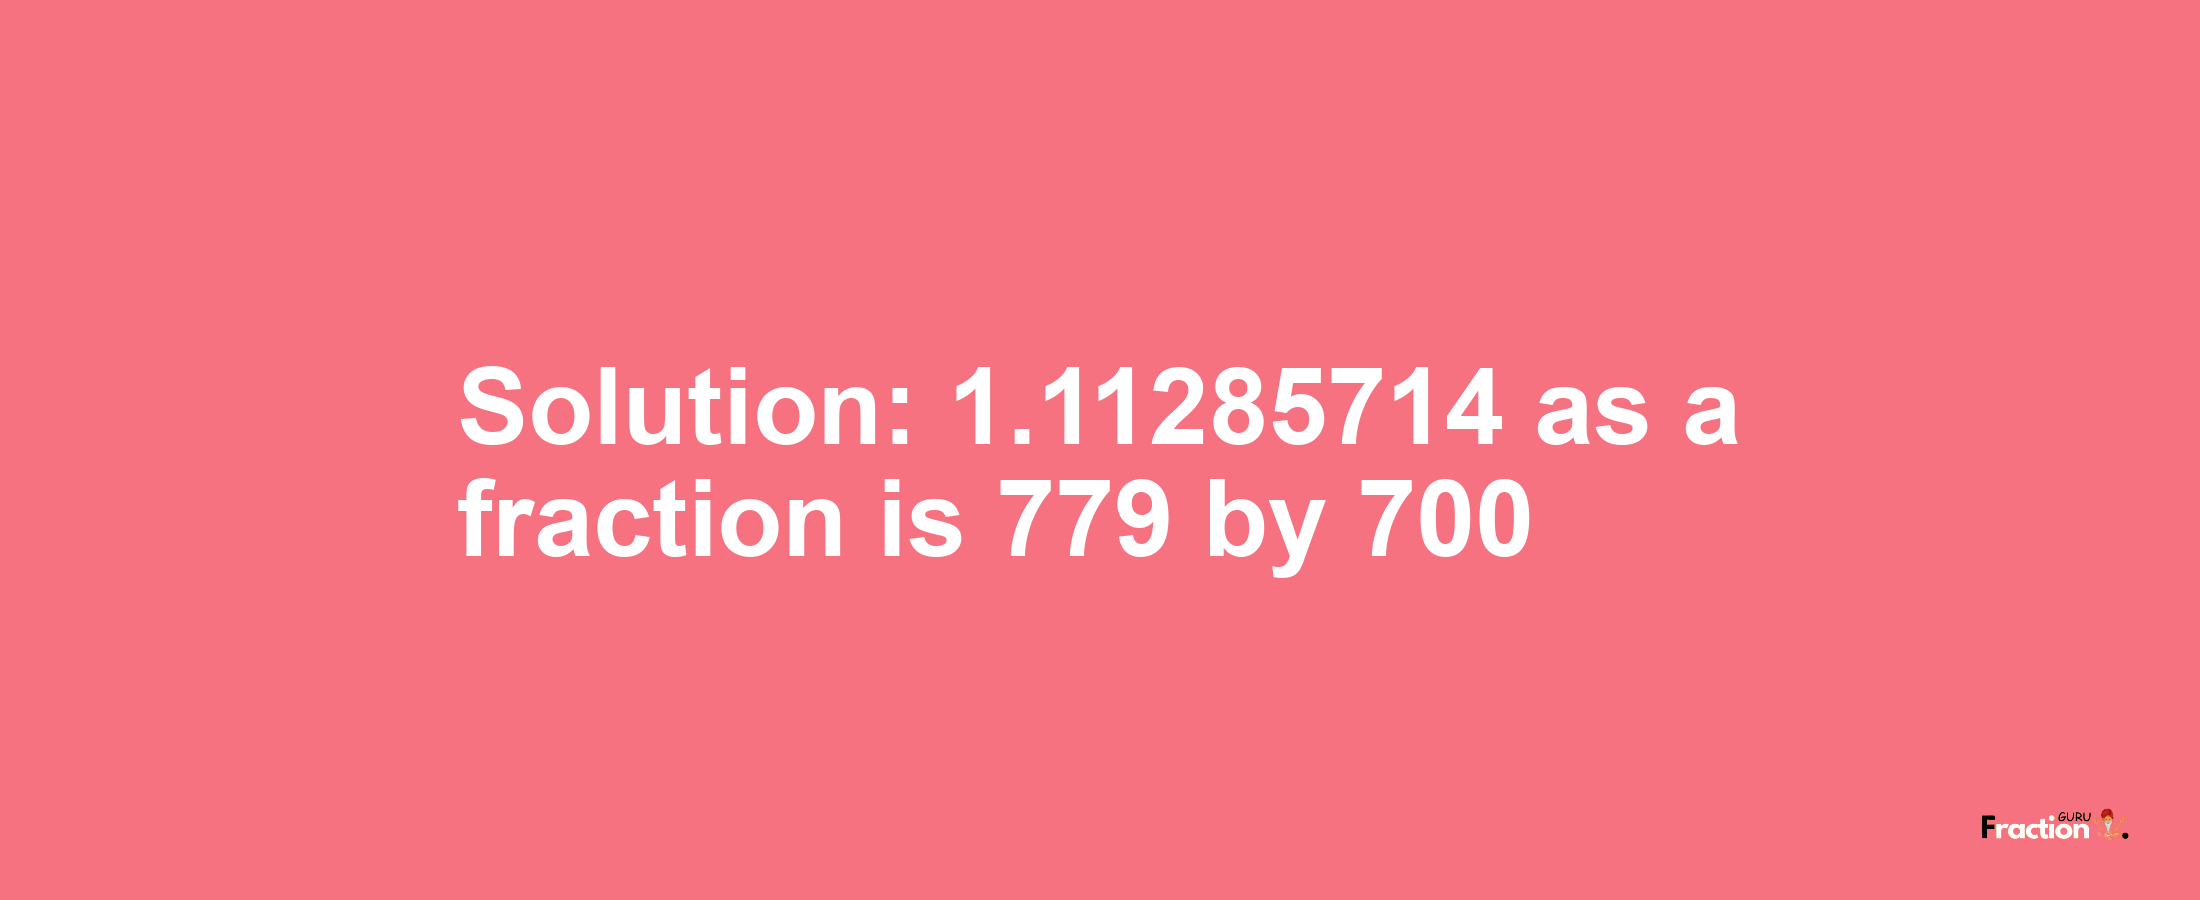 Solution:1.11285714 as a fraction is 779/700